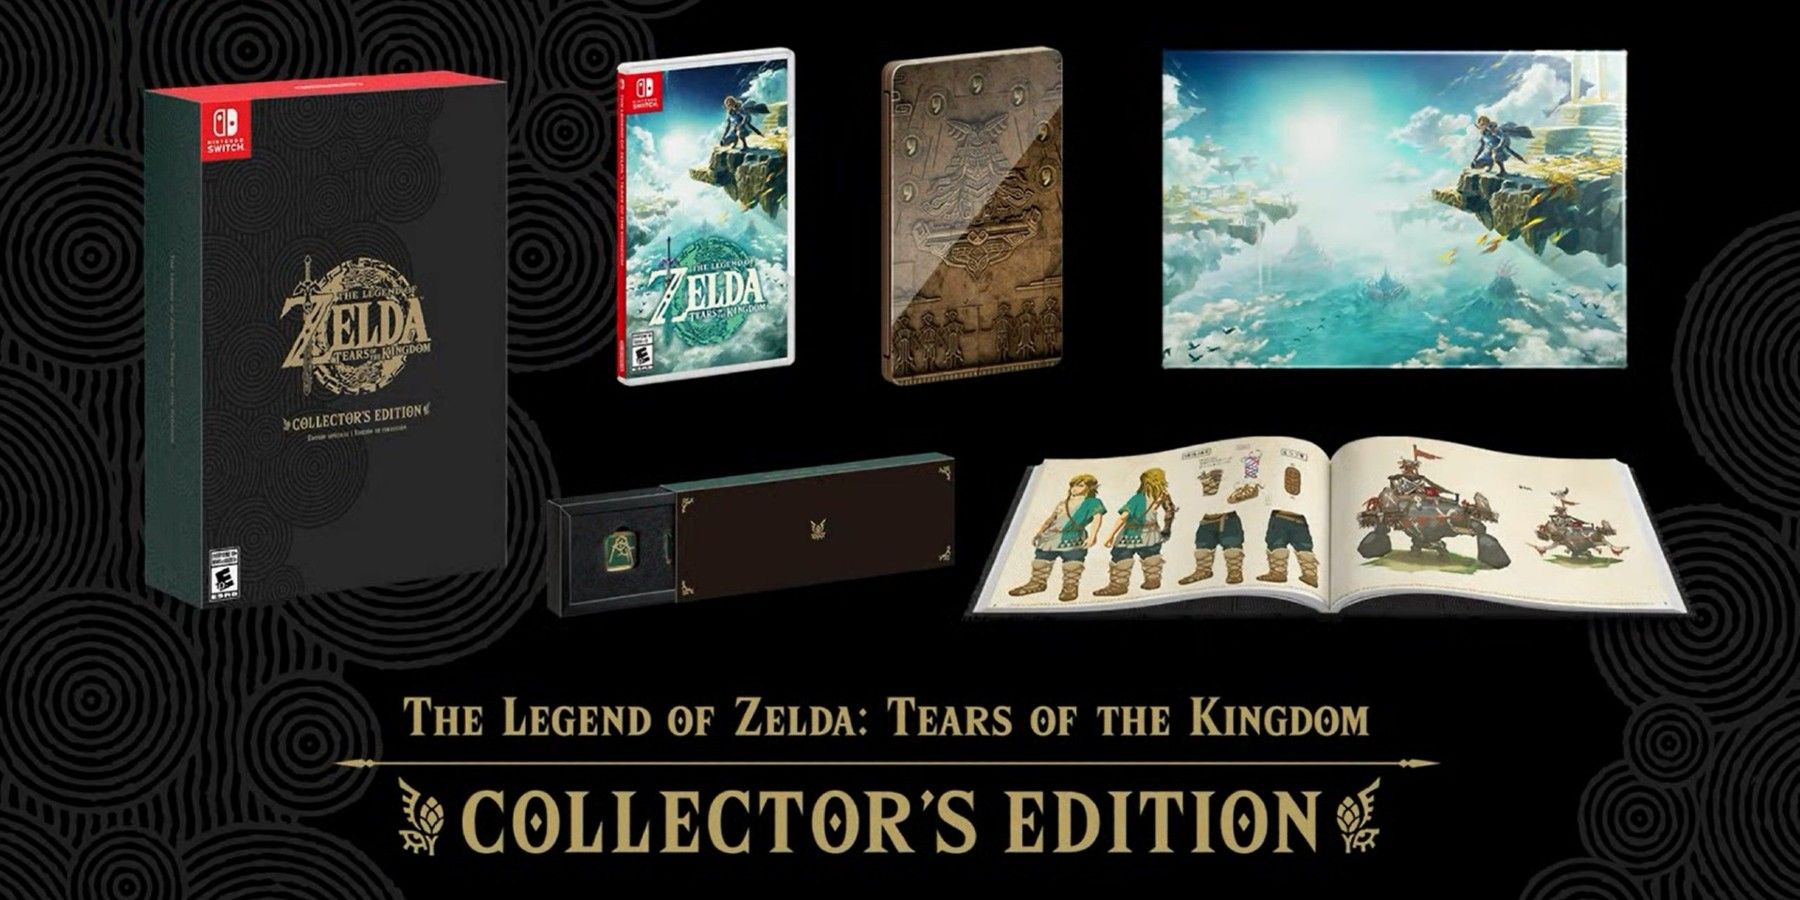 Everything in The Legend of Zelda: Tears of the Kingdom's Collectors